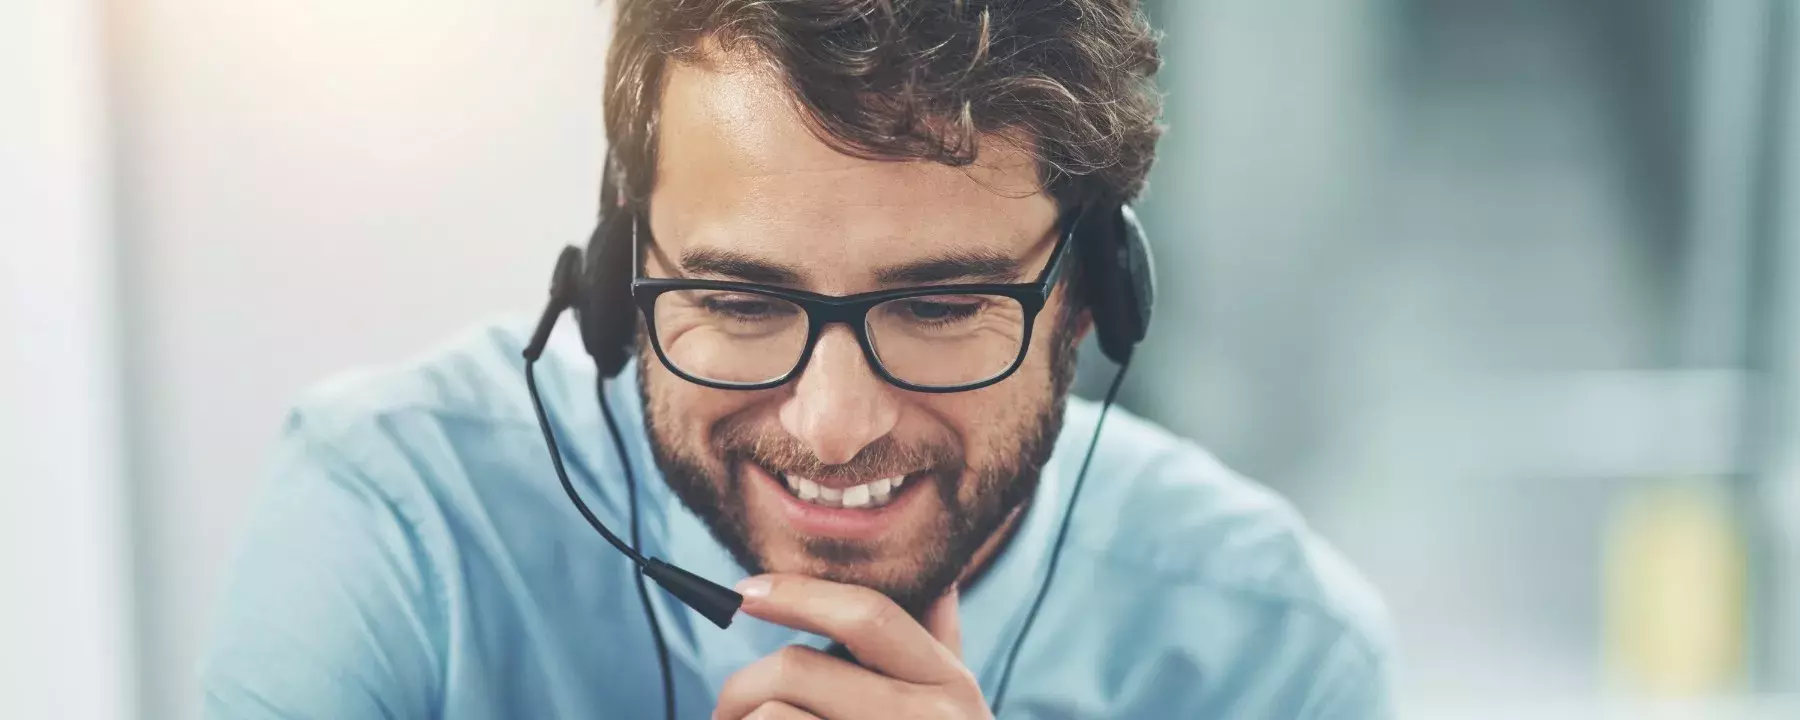 happy-young-man-working-in-a-call-center